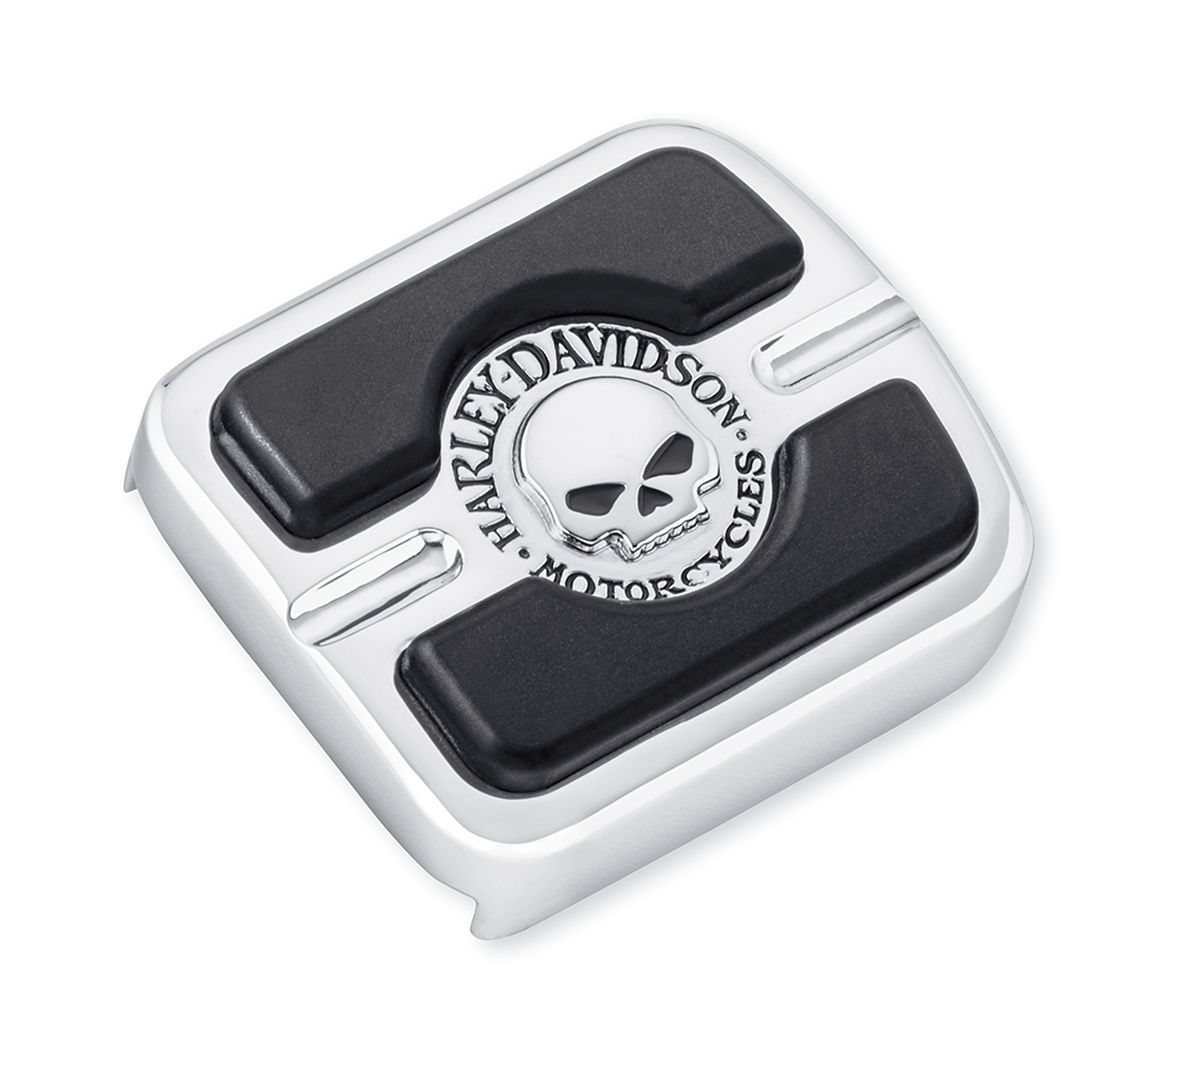 Harley-Davidson® Willie G Skull Brake Pedal Pad - Small - Chrome - 42710-04  Add a little attitude to your ride. Styled to complement Harley-Davidson® Skull accessory items, the menacing raised skull with black-filled eyes leaps from a field of chrome.